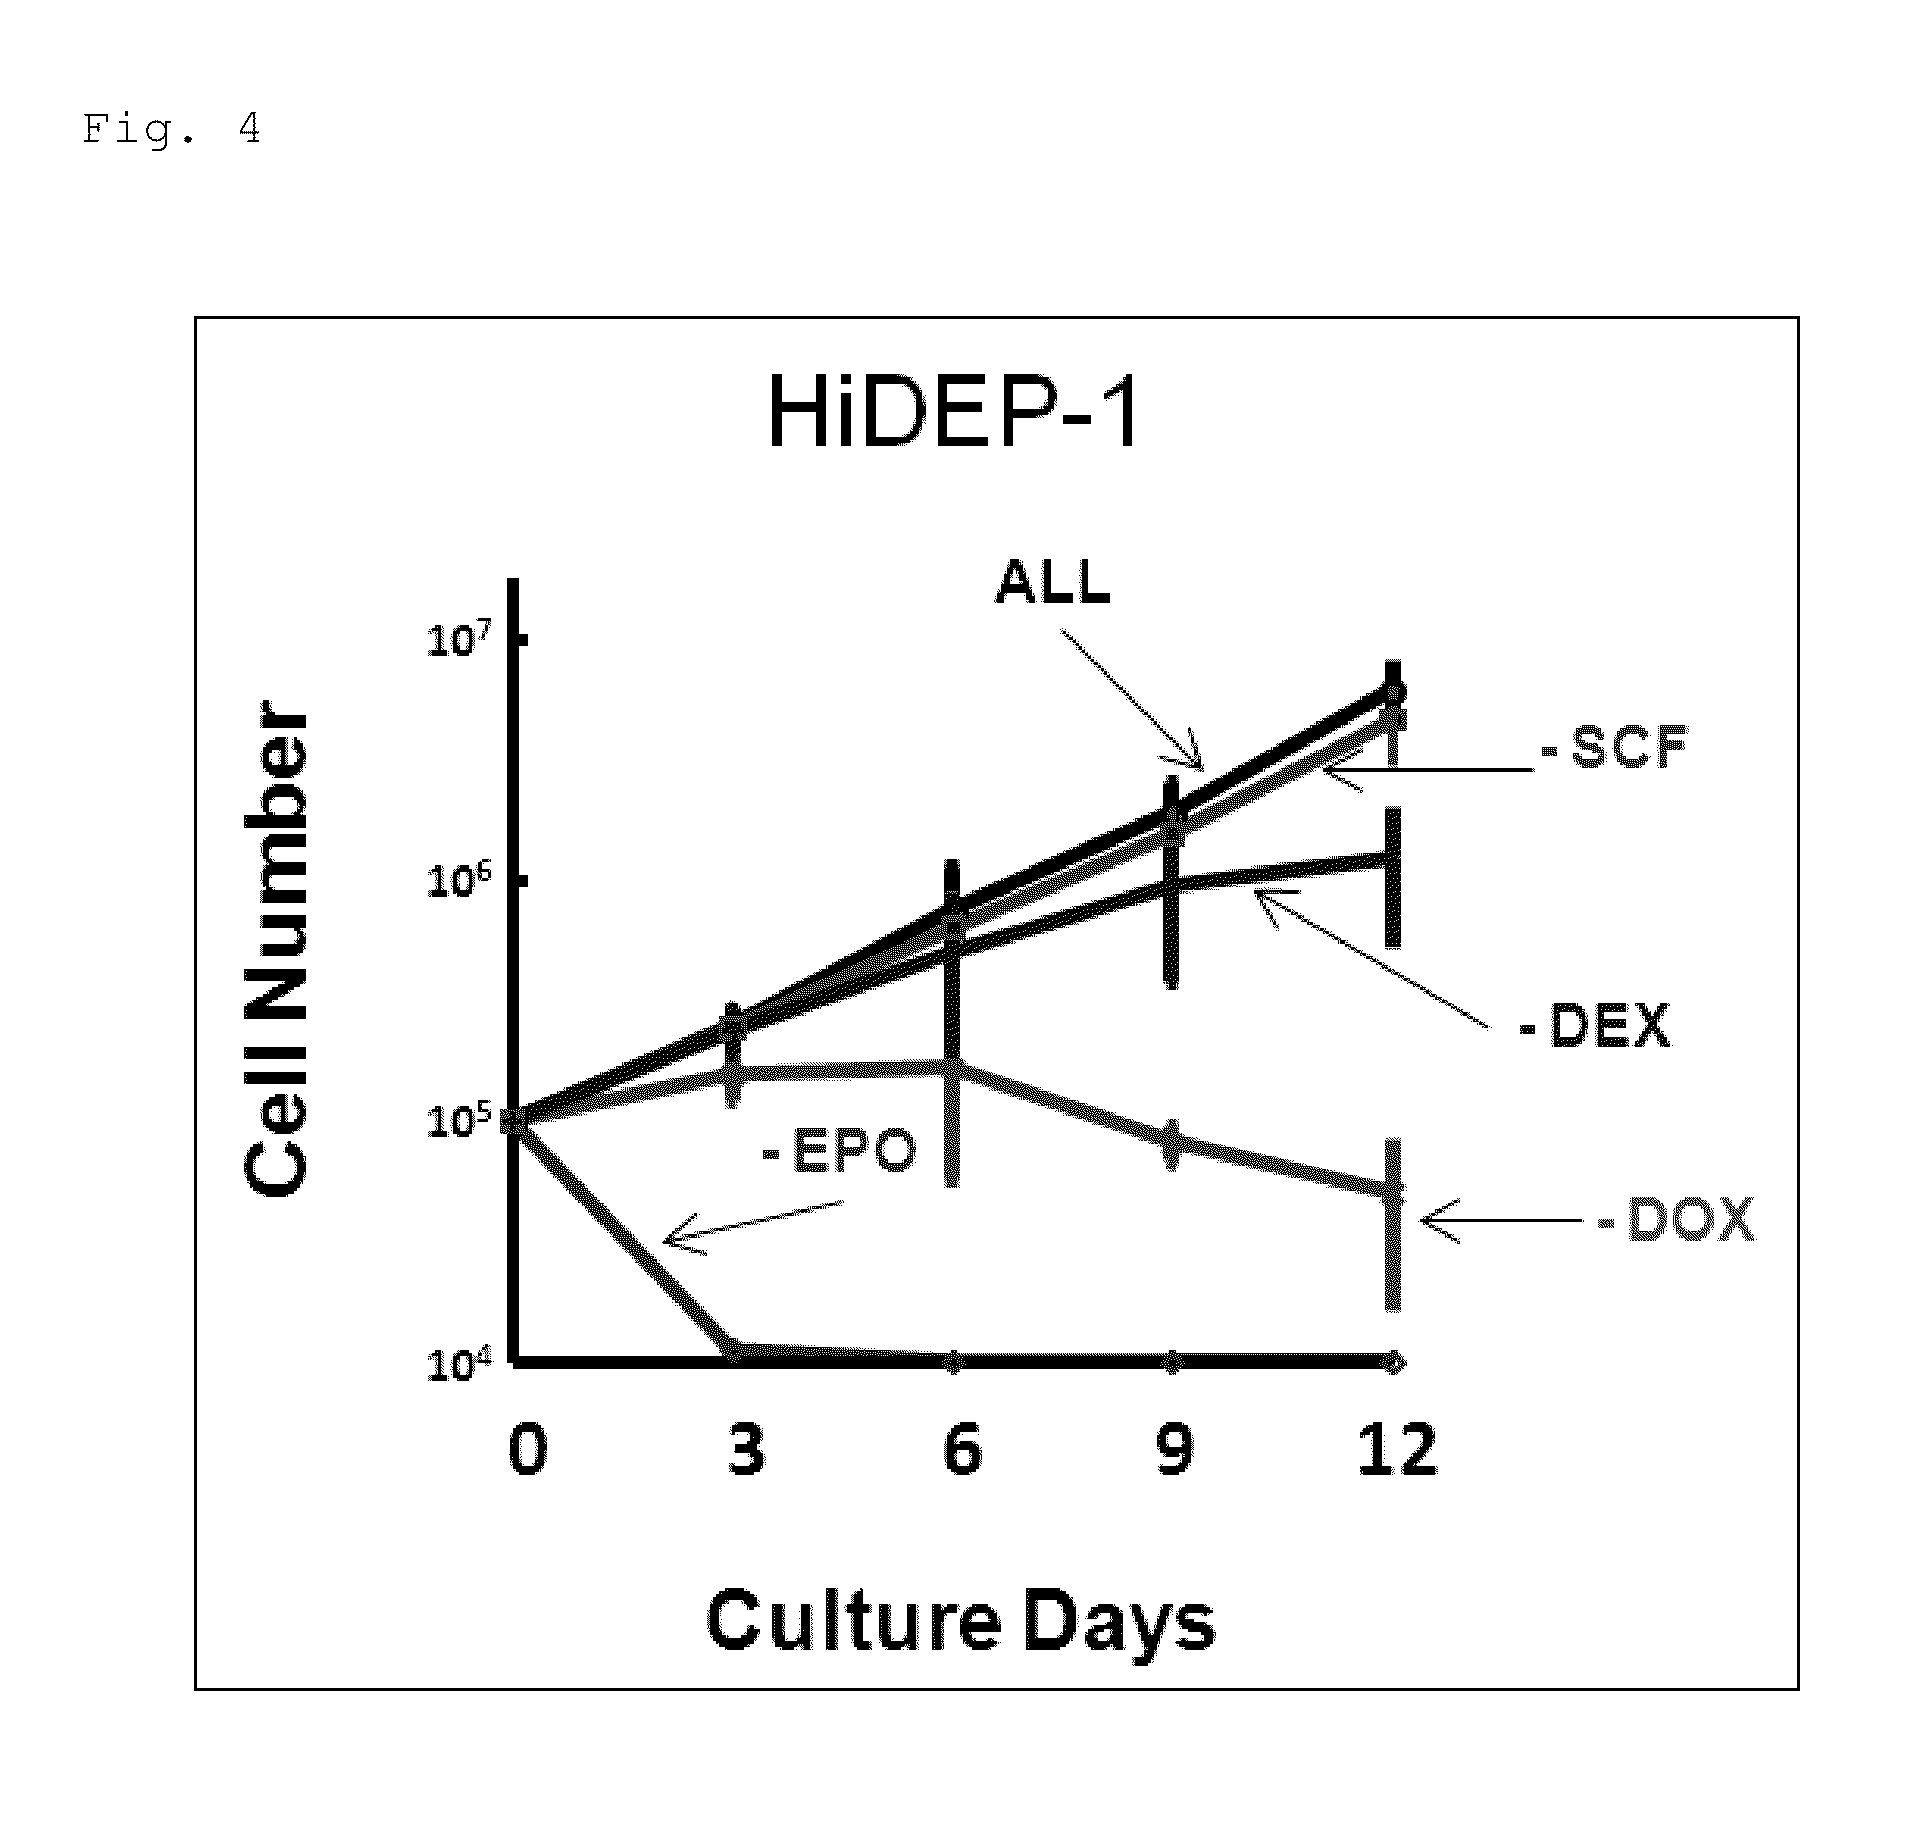 Human erythroid progenitor cell line and method for producing human enucleated red blood cells